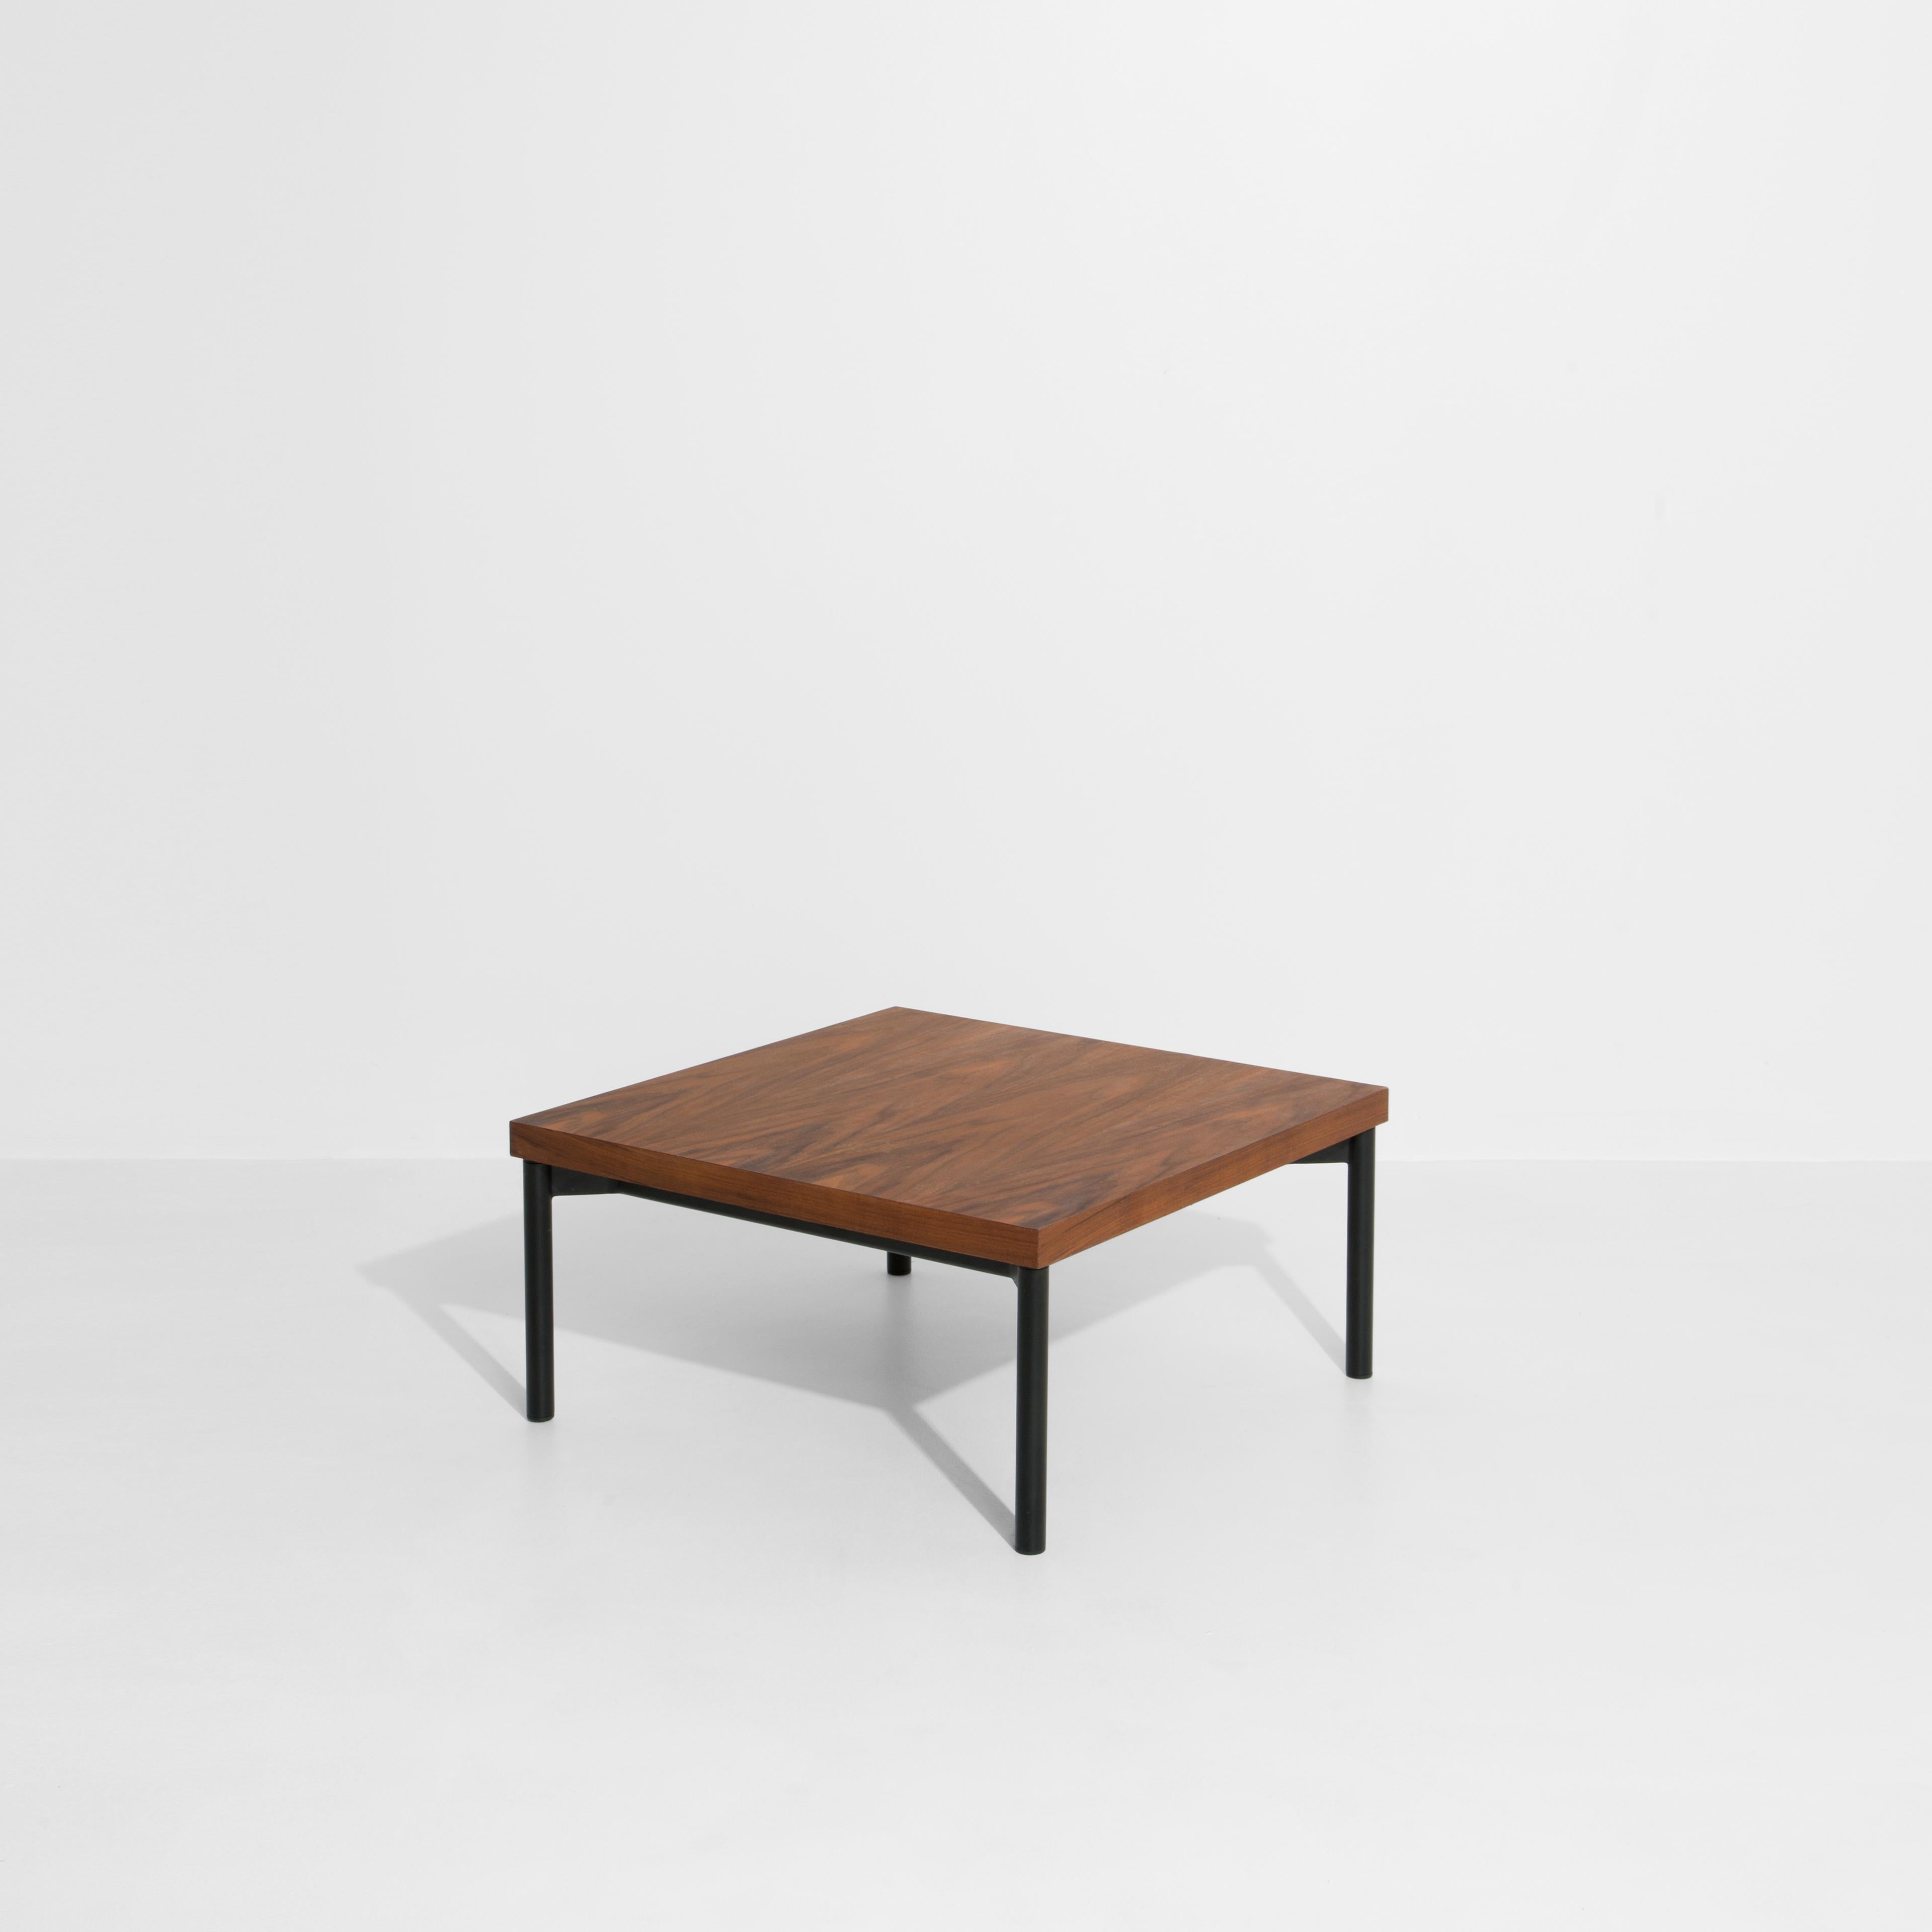 Petite Friture Grid Coffee Table in Walnut by Studio Pool, 2015

Pool designed the Grid collection in reference to the Bauhaus style and in honour of the graphic talents. Each element of this all-modular system retains the identity of the original